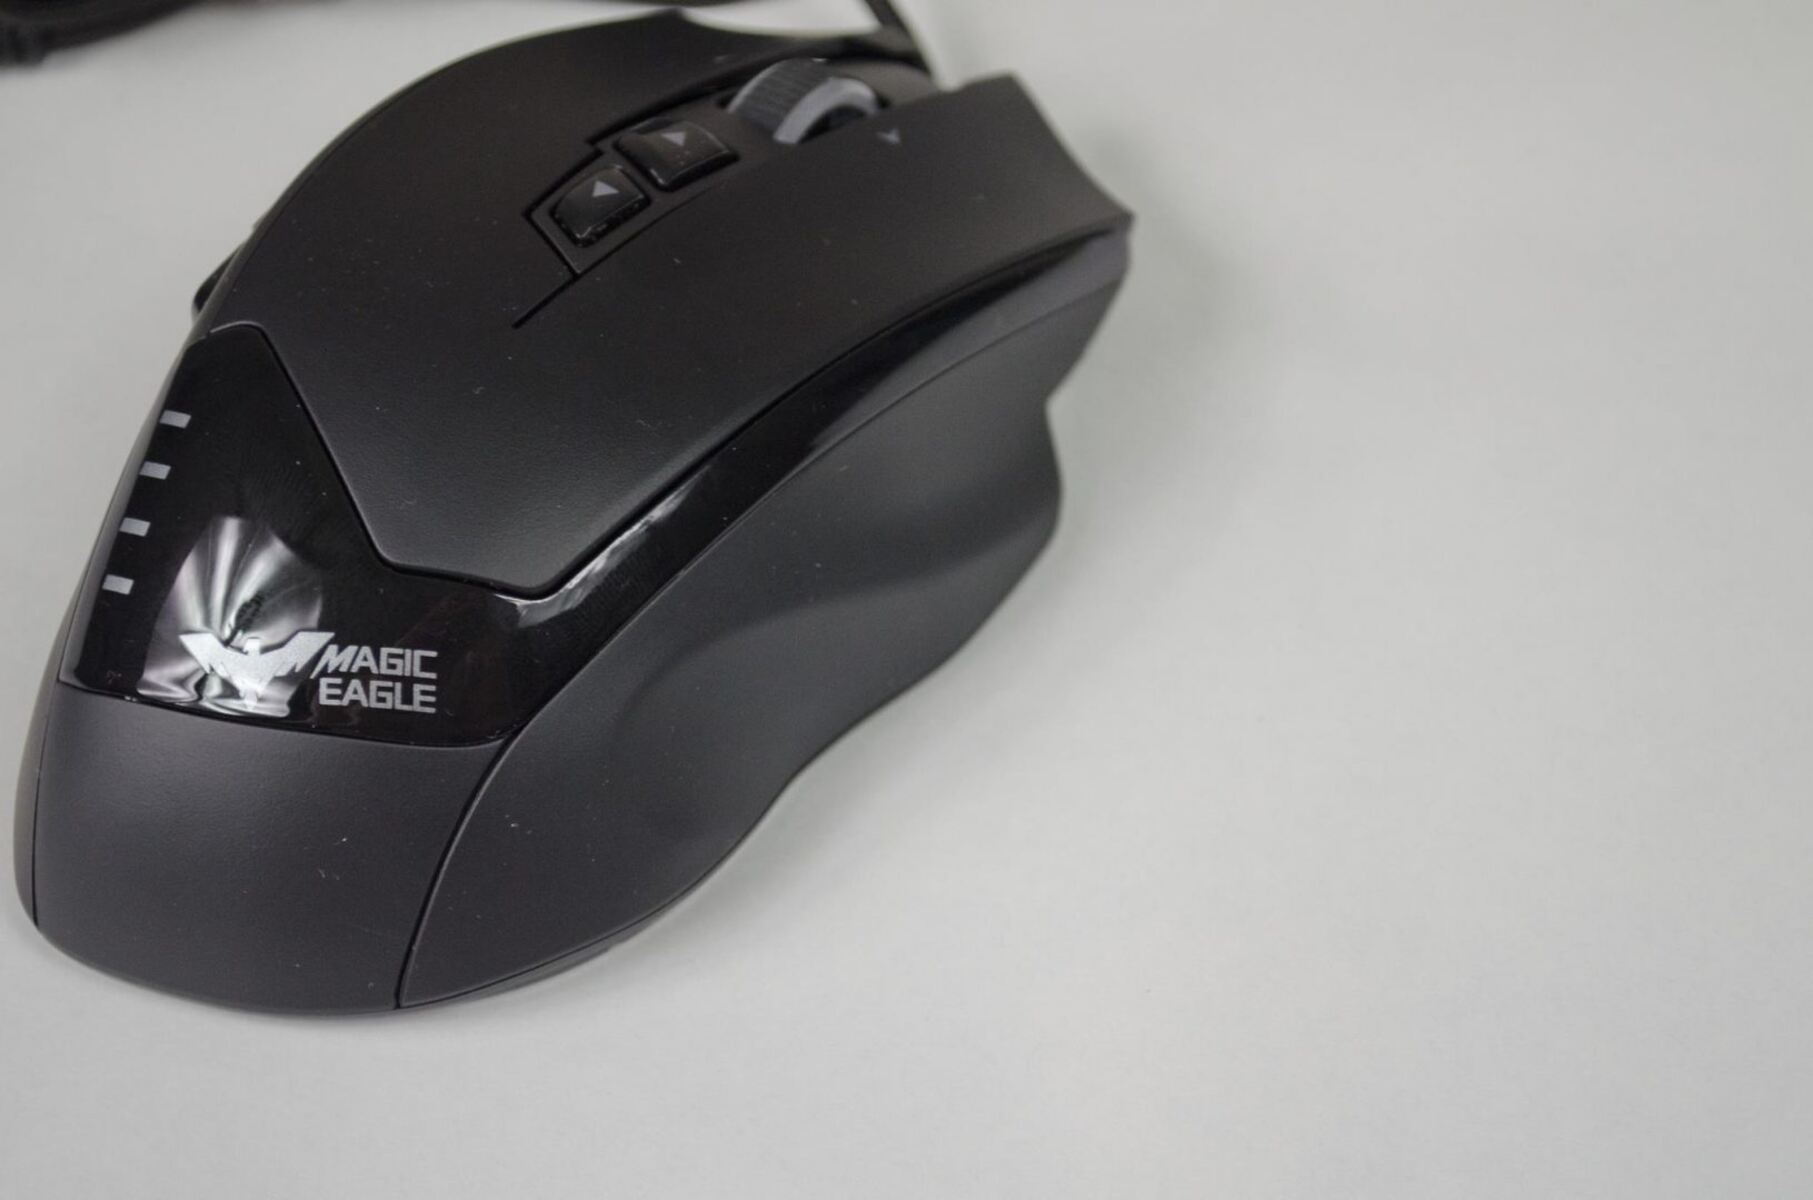 havit-magic-eagle-gaming-mouse-how-to-open